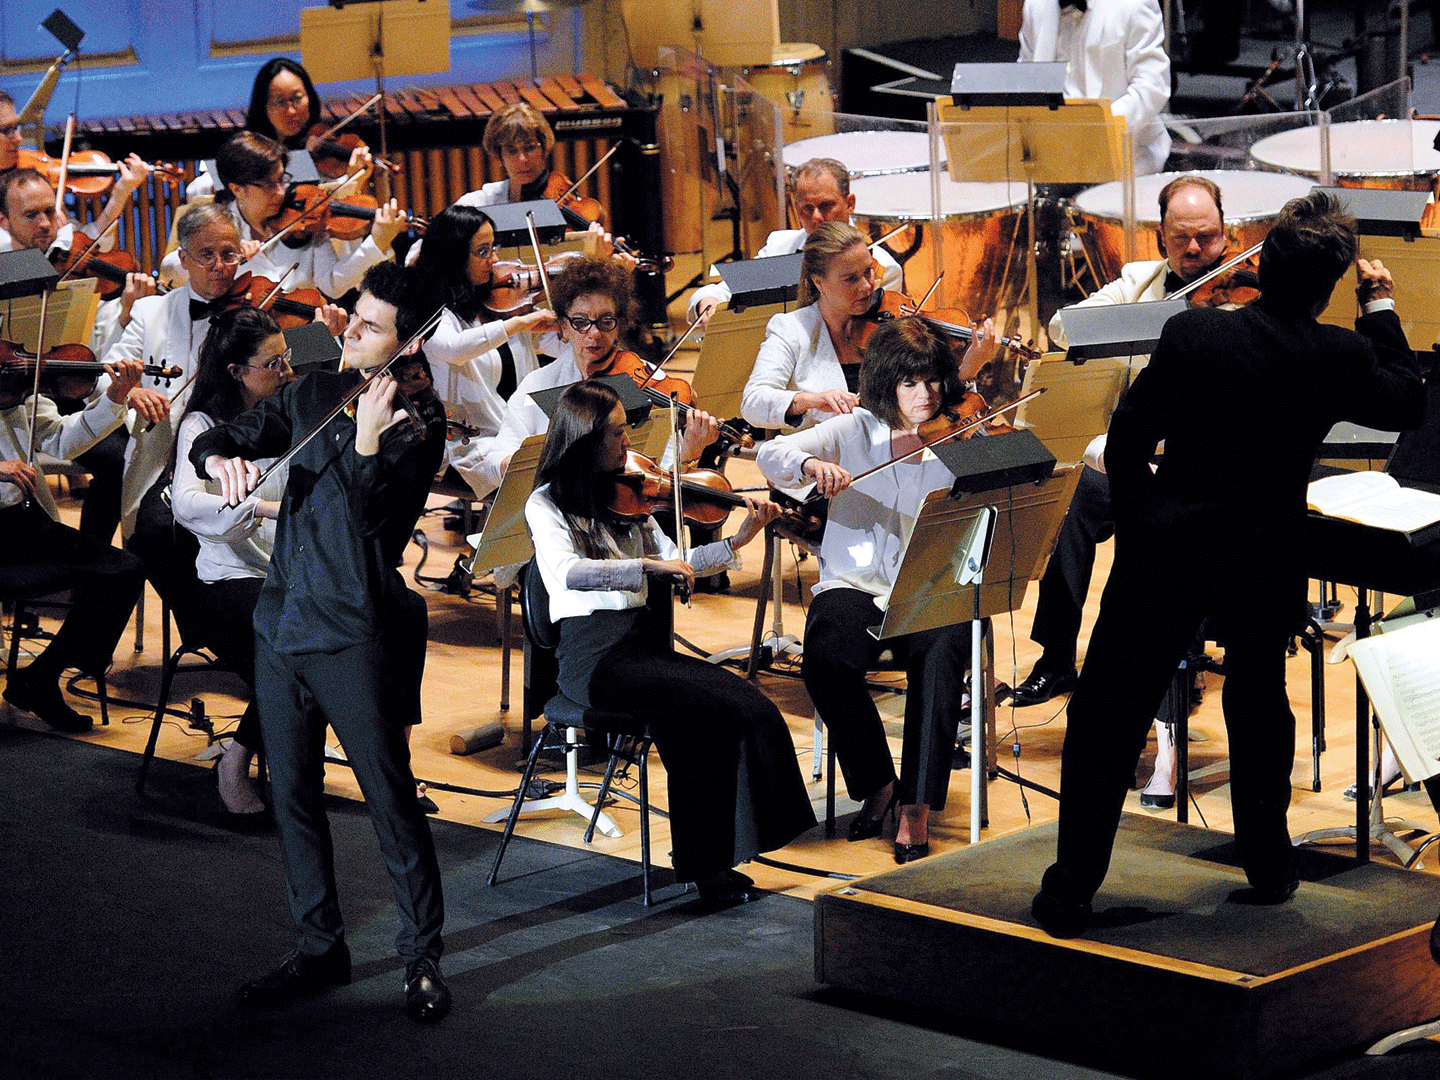 Violinist performs among an orchestra at Symphony Hall in Boston, MA in 2018.